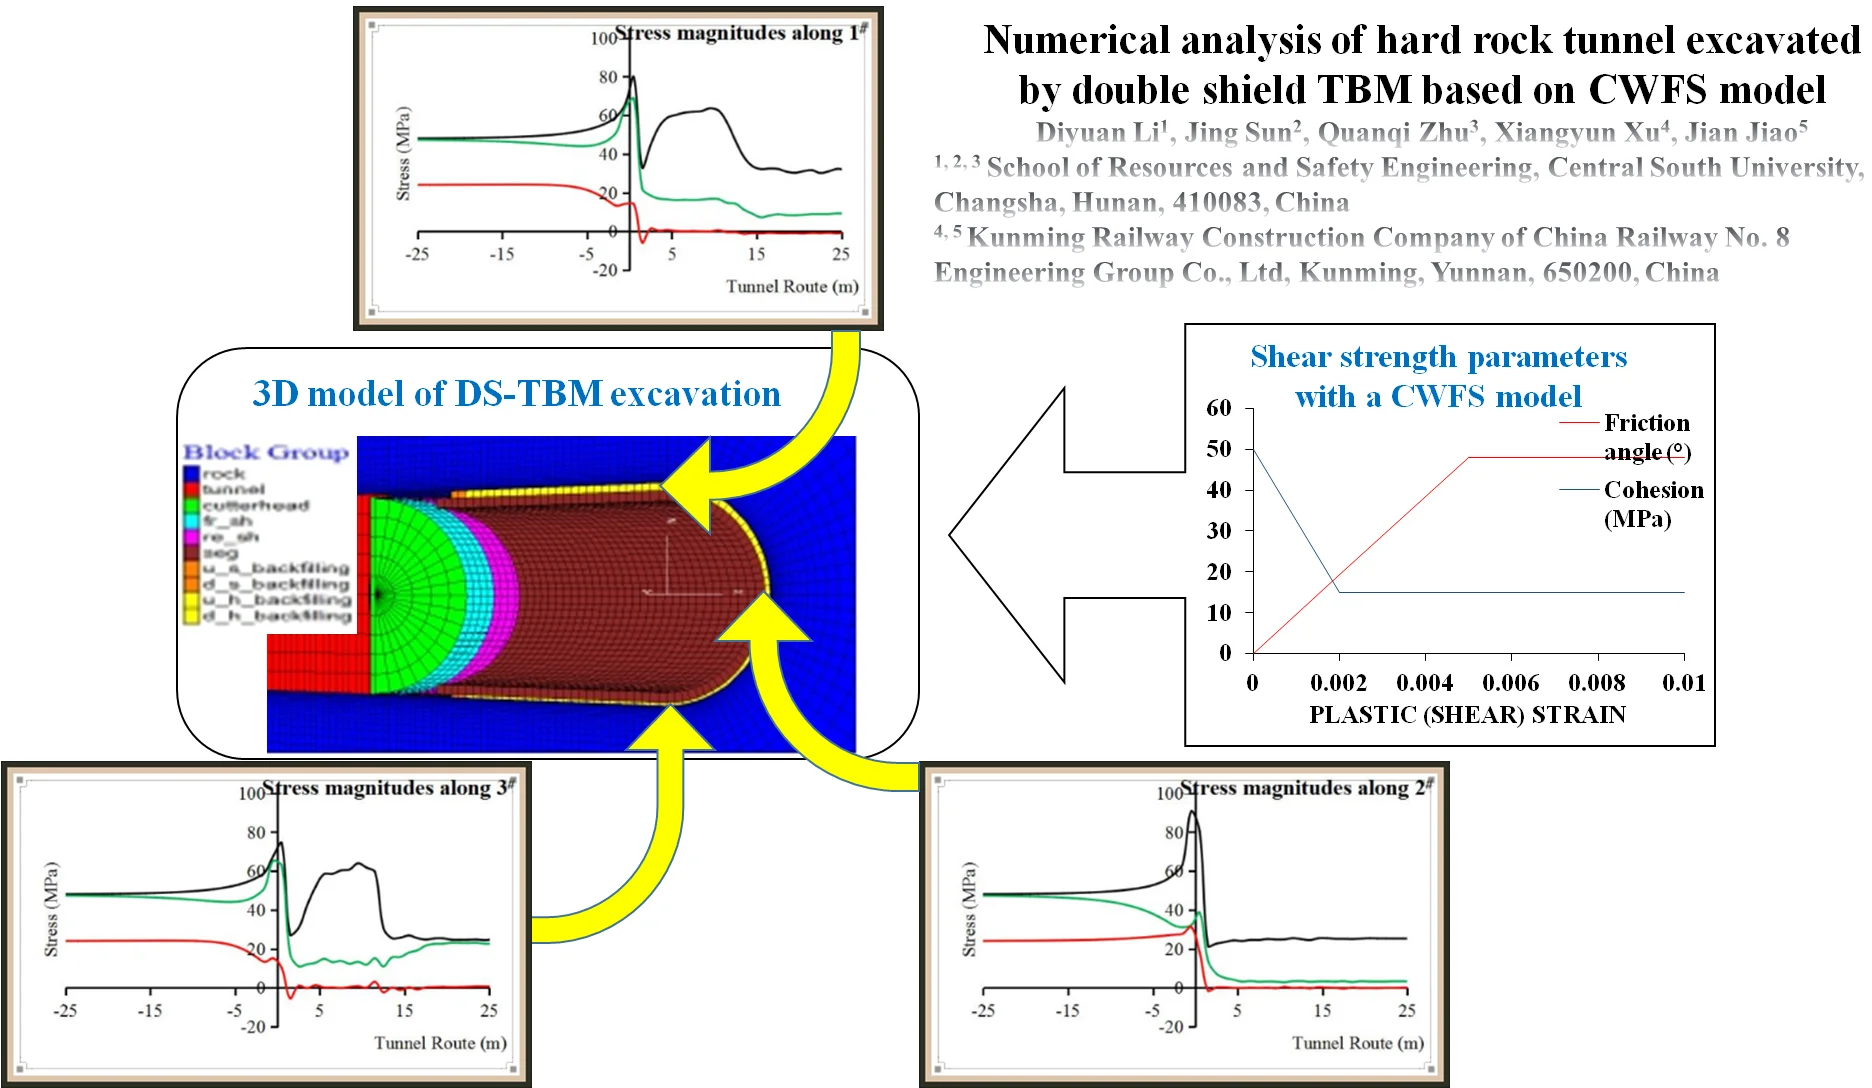 Numerical analysis of hard rock tunnel excavated by double shield TBM based on CWFS model